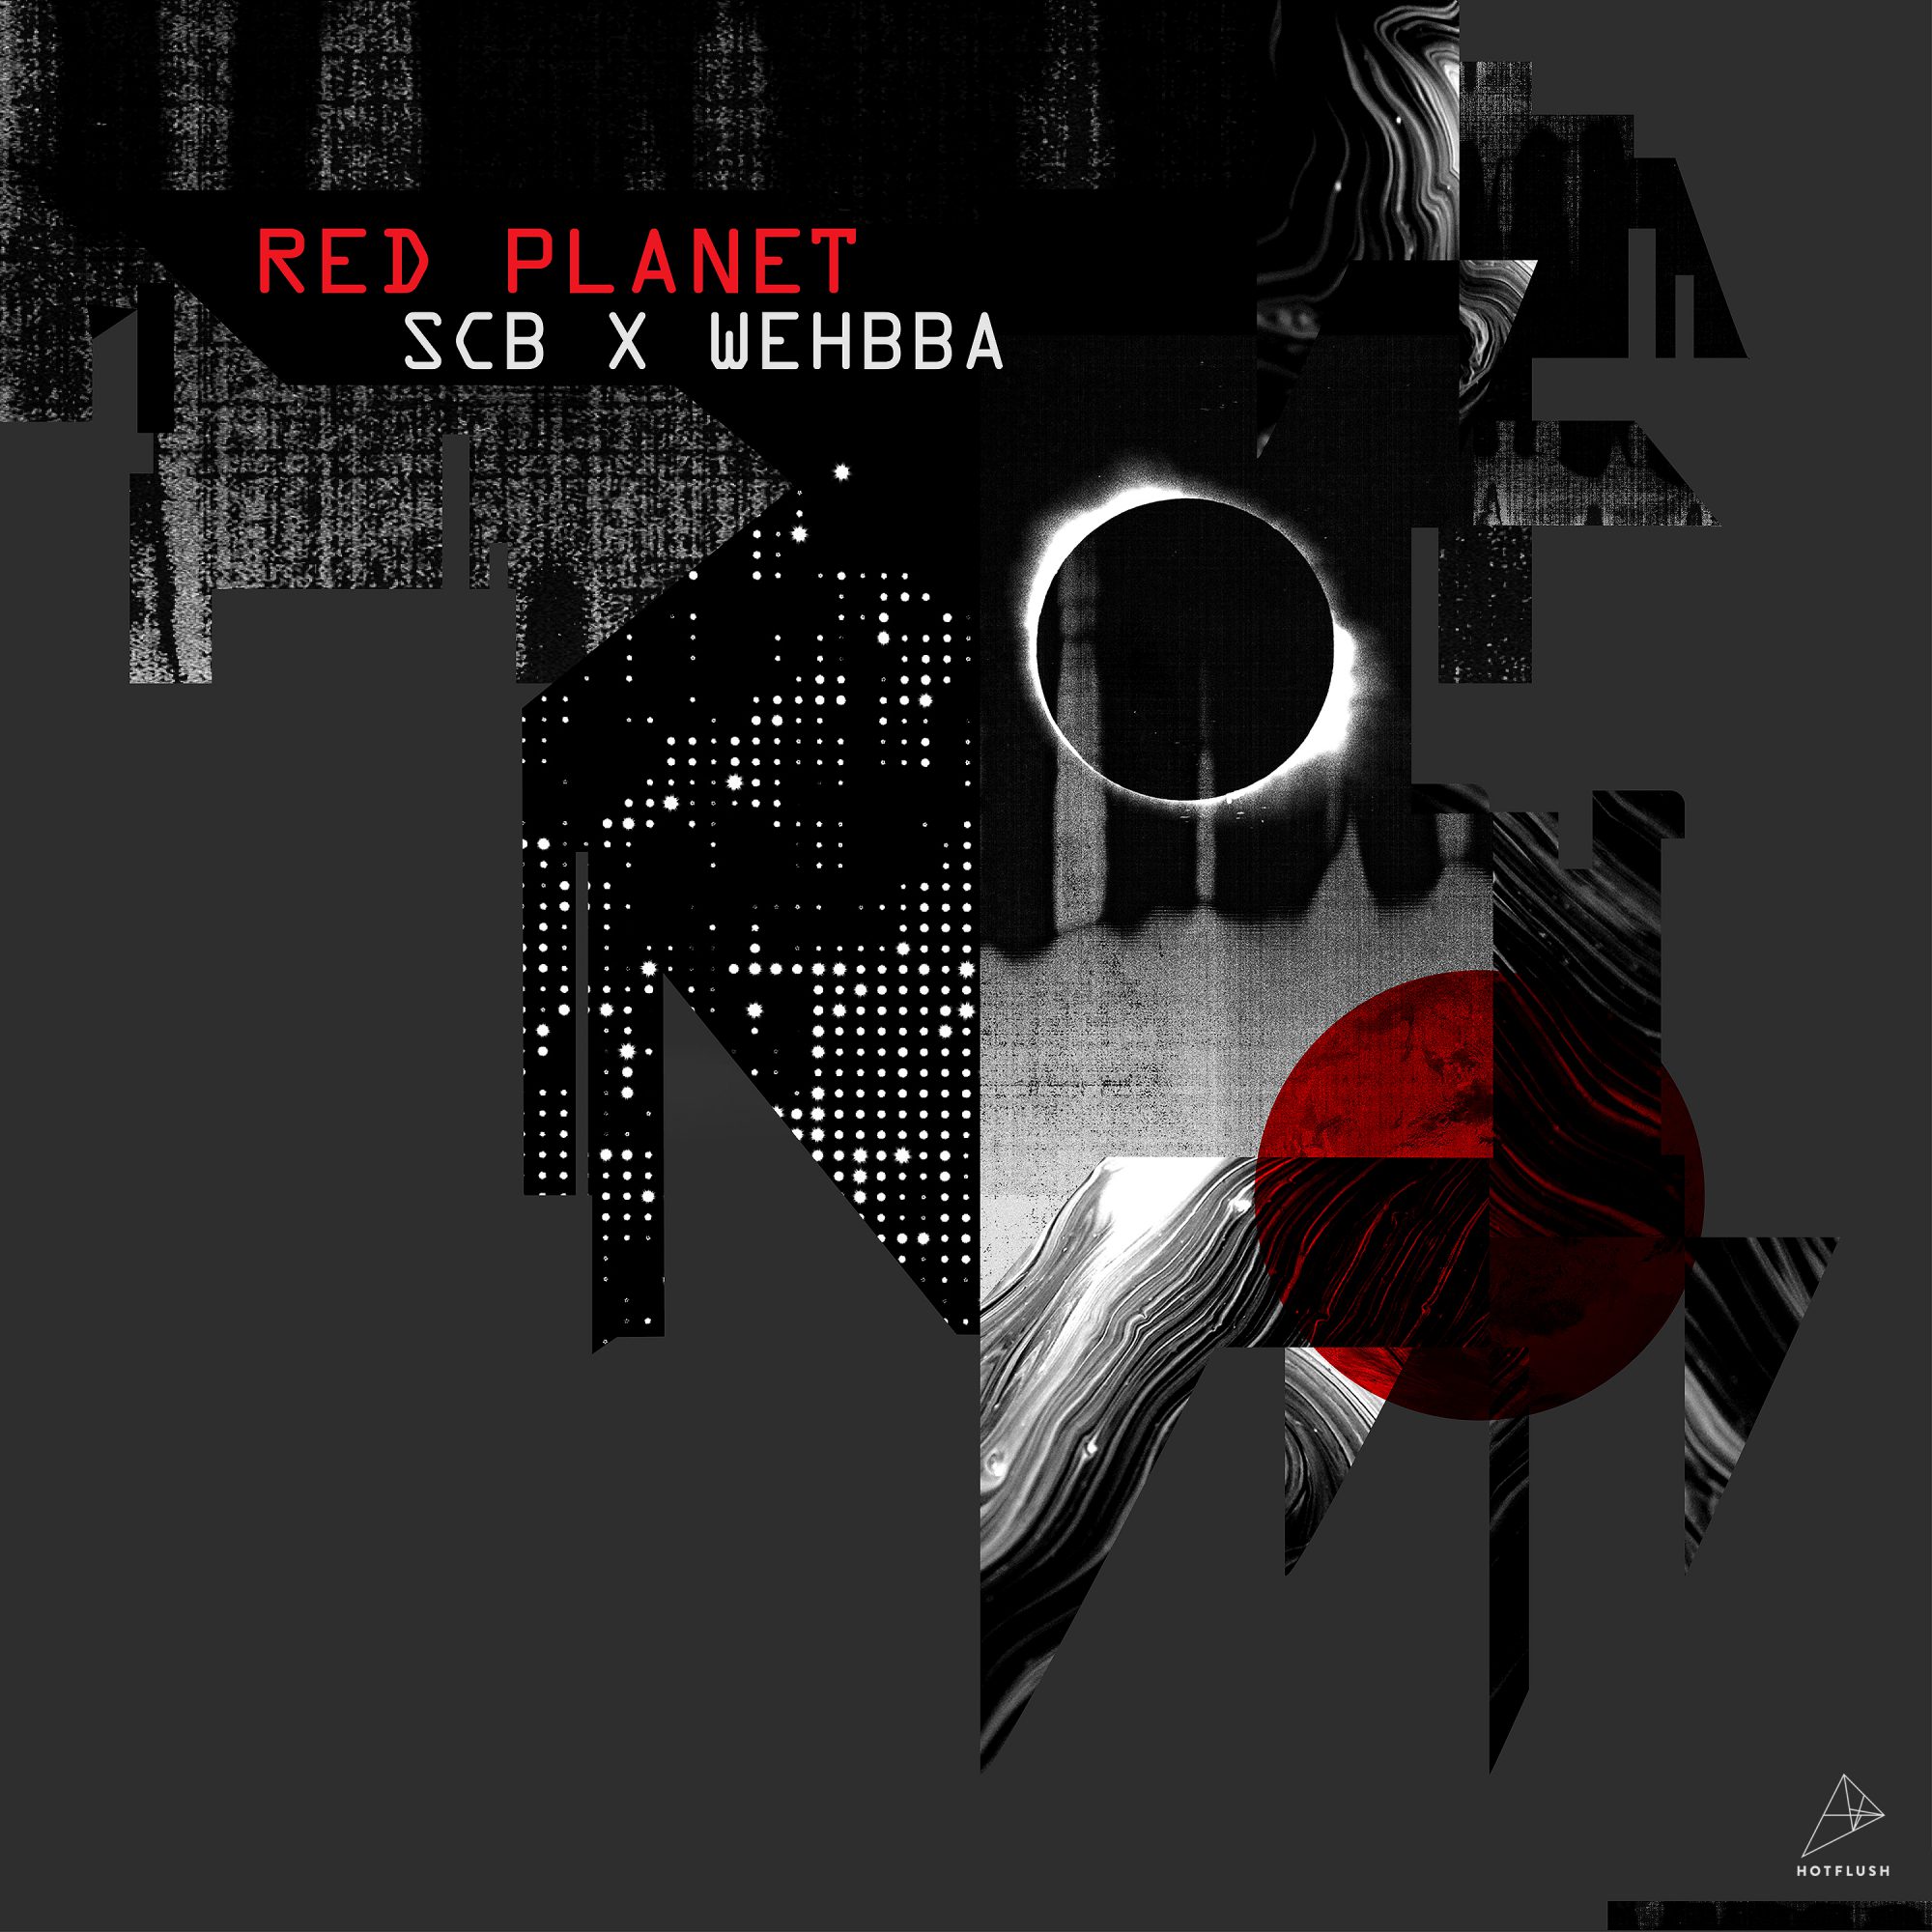 SCB x Wehbba - Red Planet EP